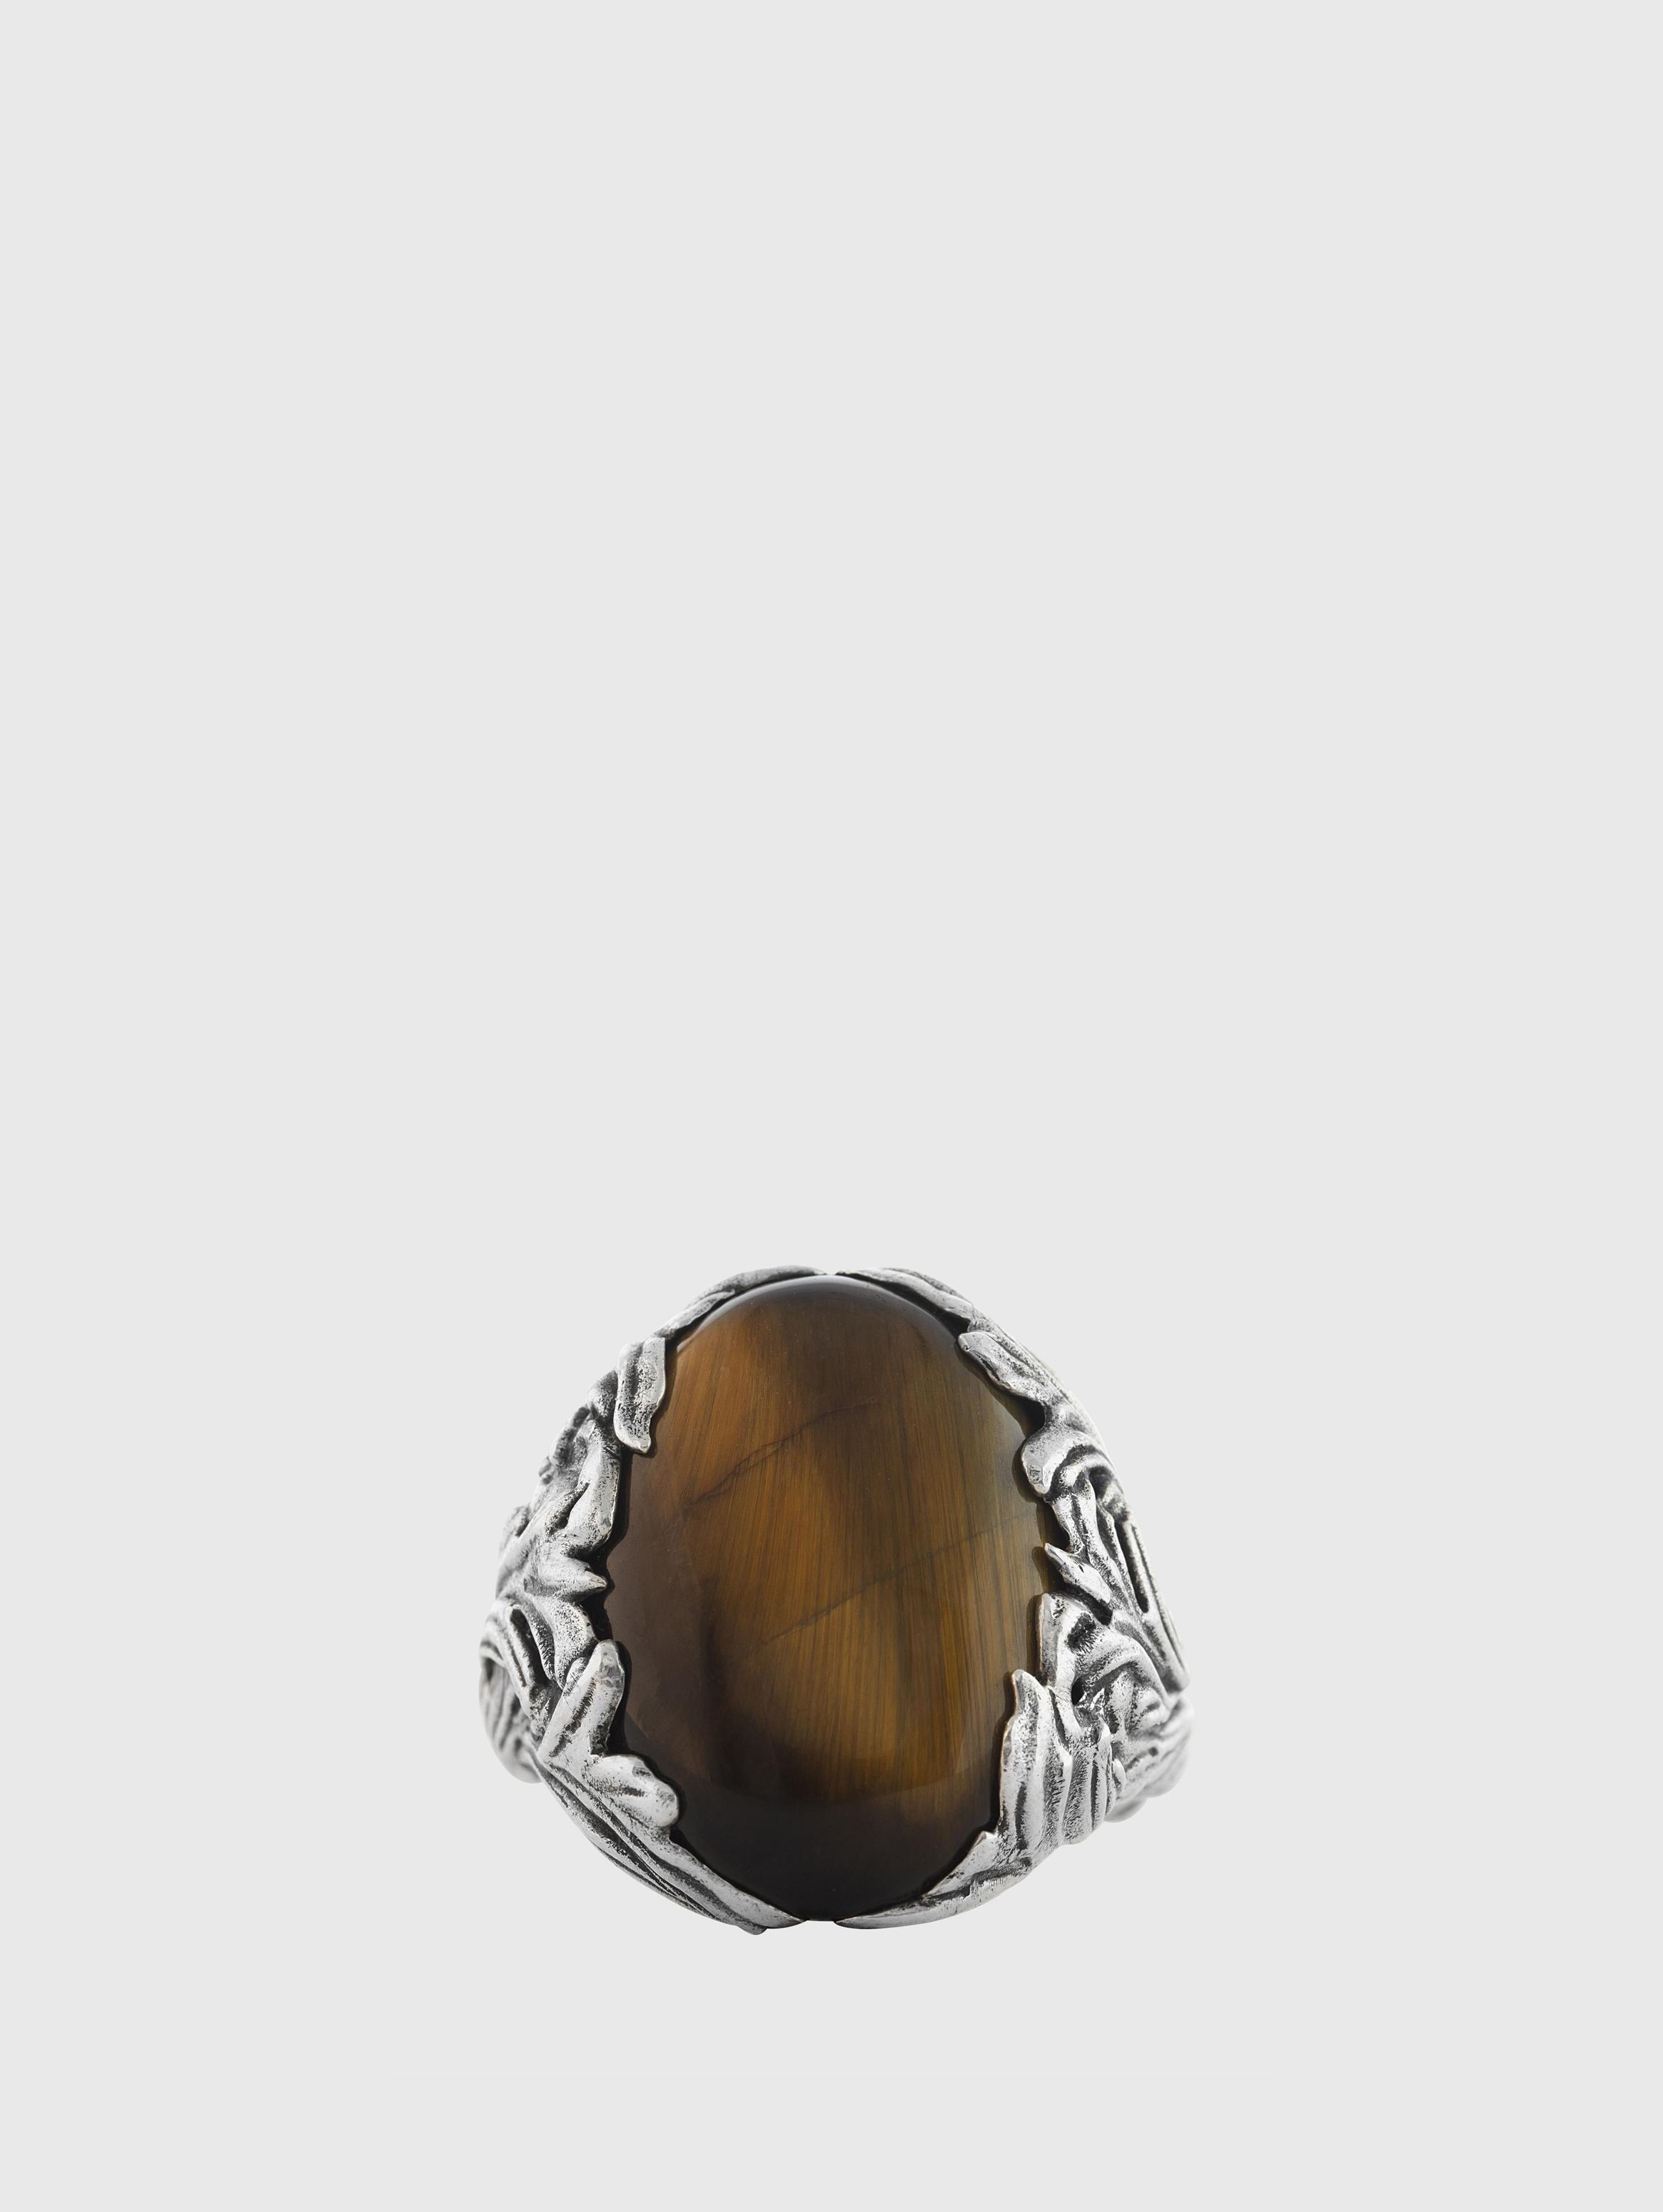 wollet frosted tiger eye stone birthday